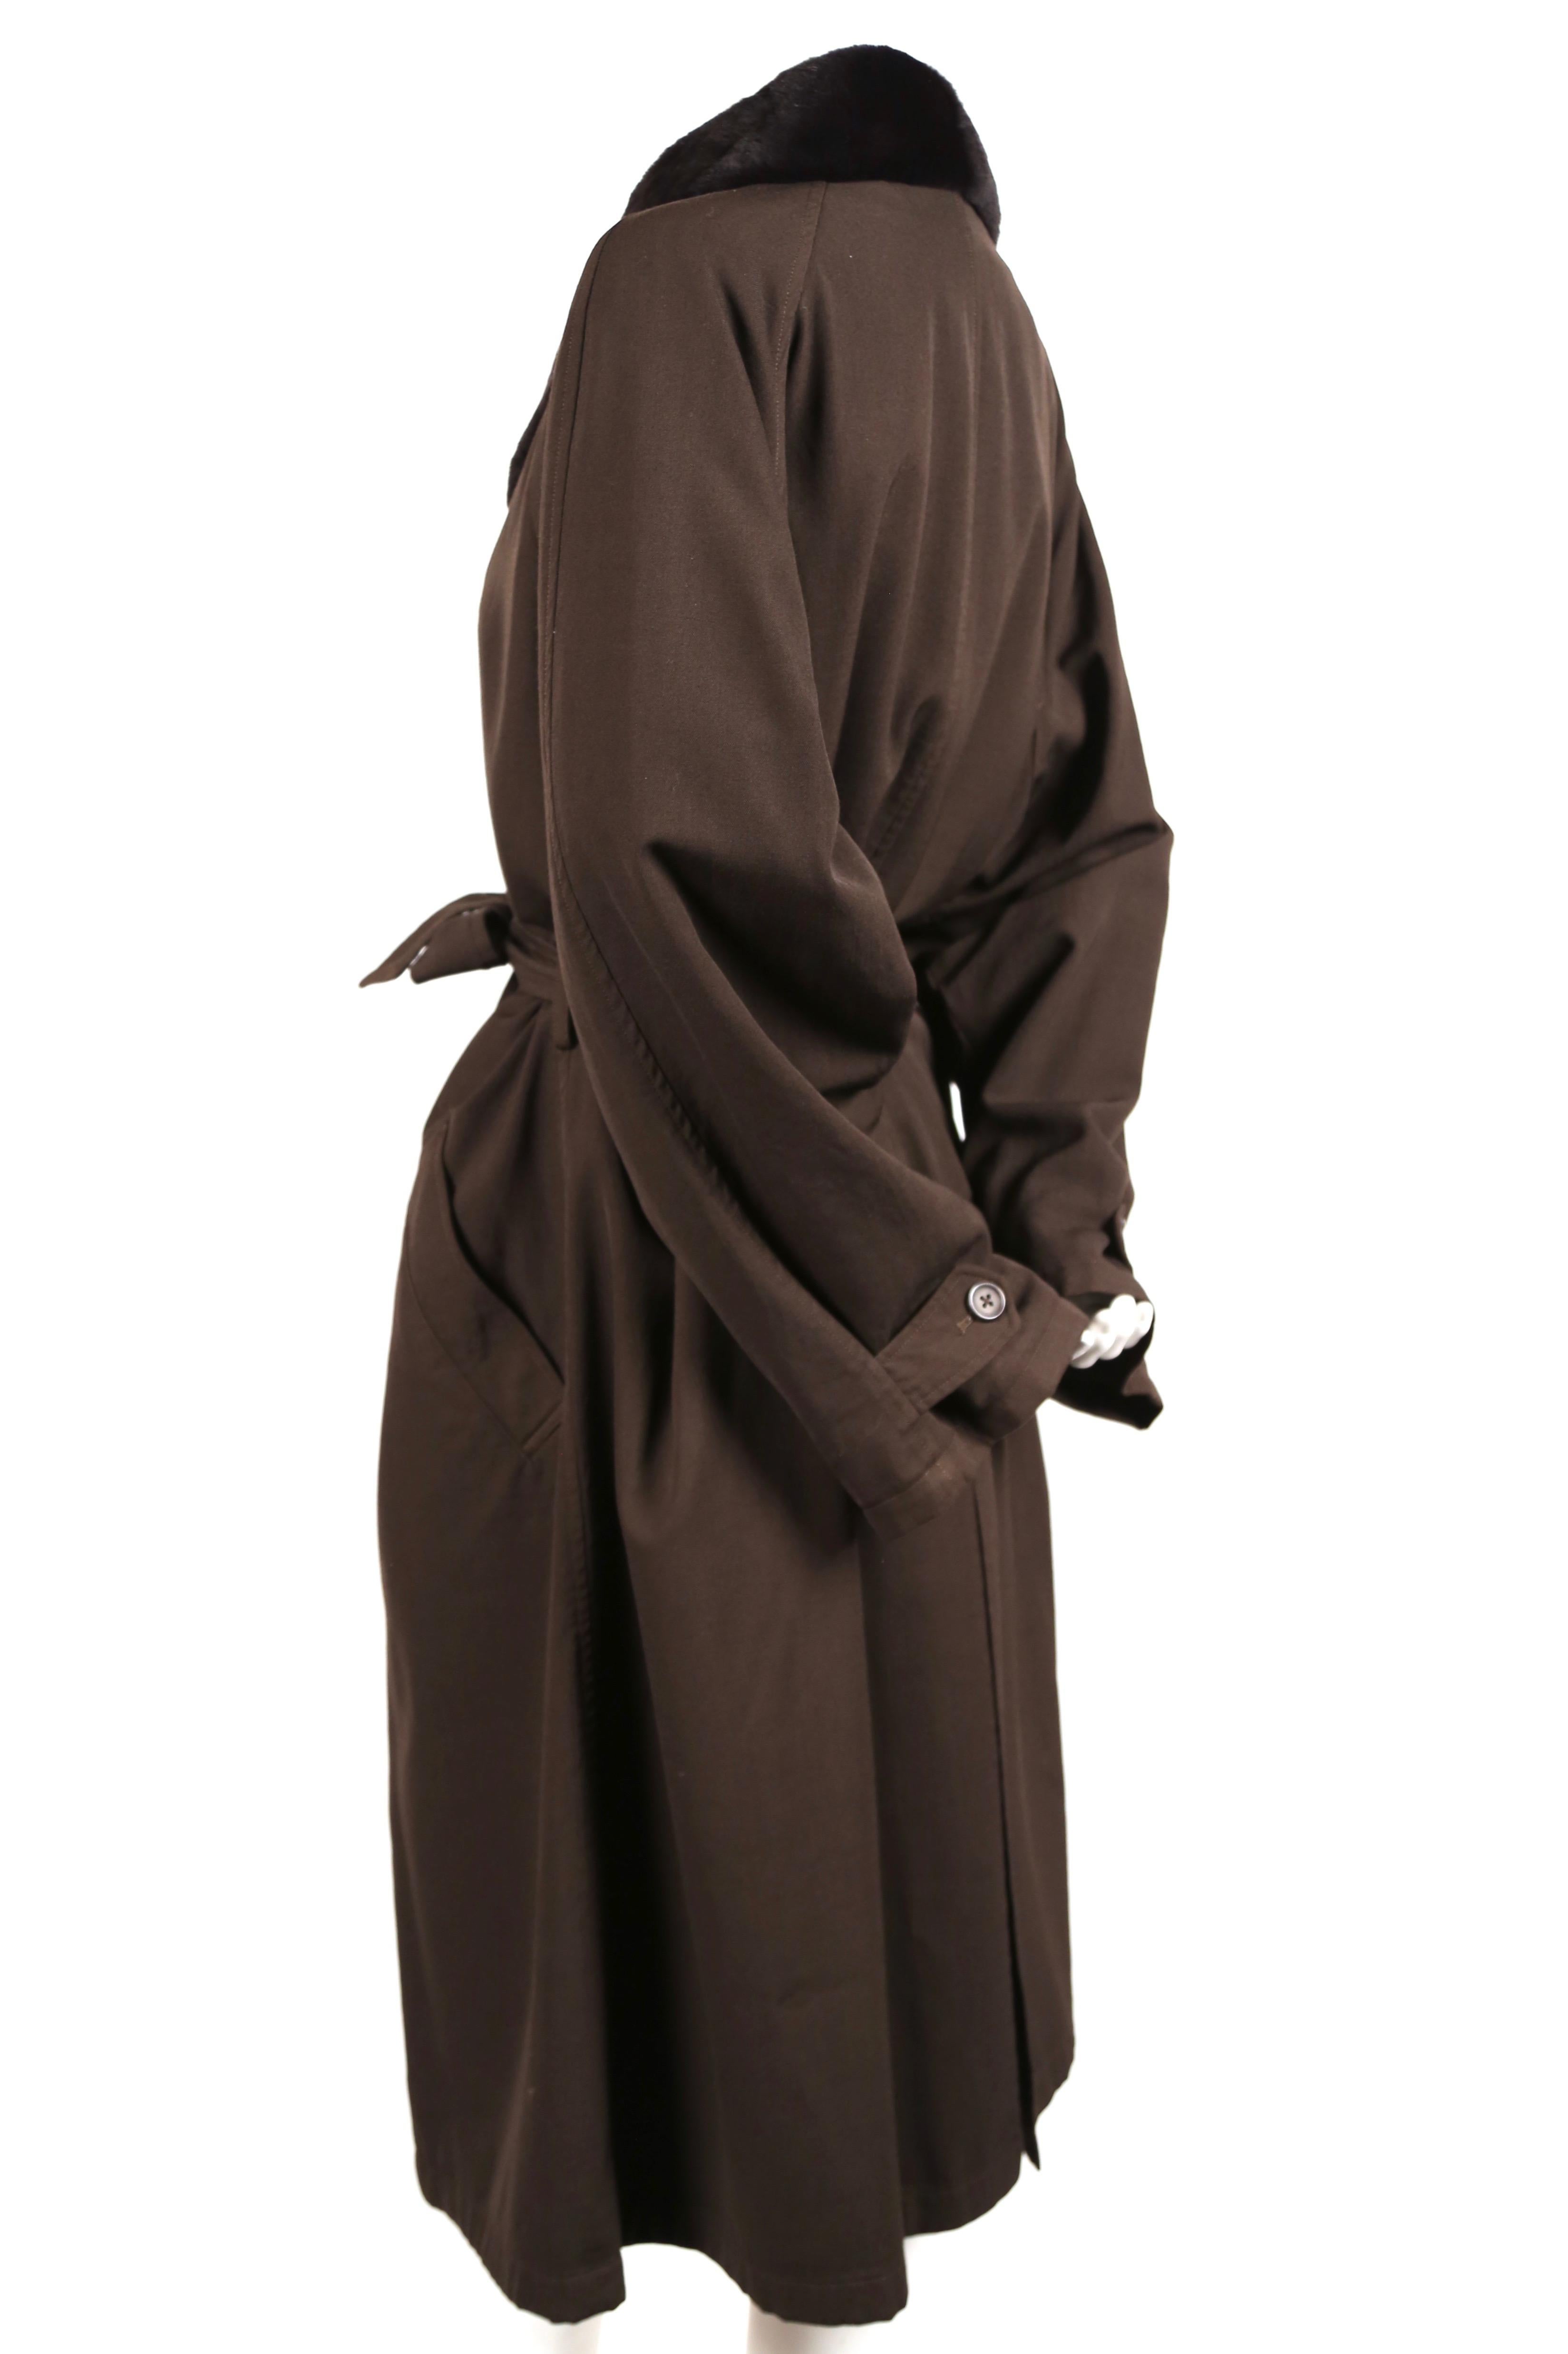 Brown wool trench with removable mink collar designed by Yohji Yamamoto for men dating to the 1990's. Although this coat is oversized, it can be worn by both men and women. Men's size M (photographed on a size 2 mannequin). Approximate measurements: